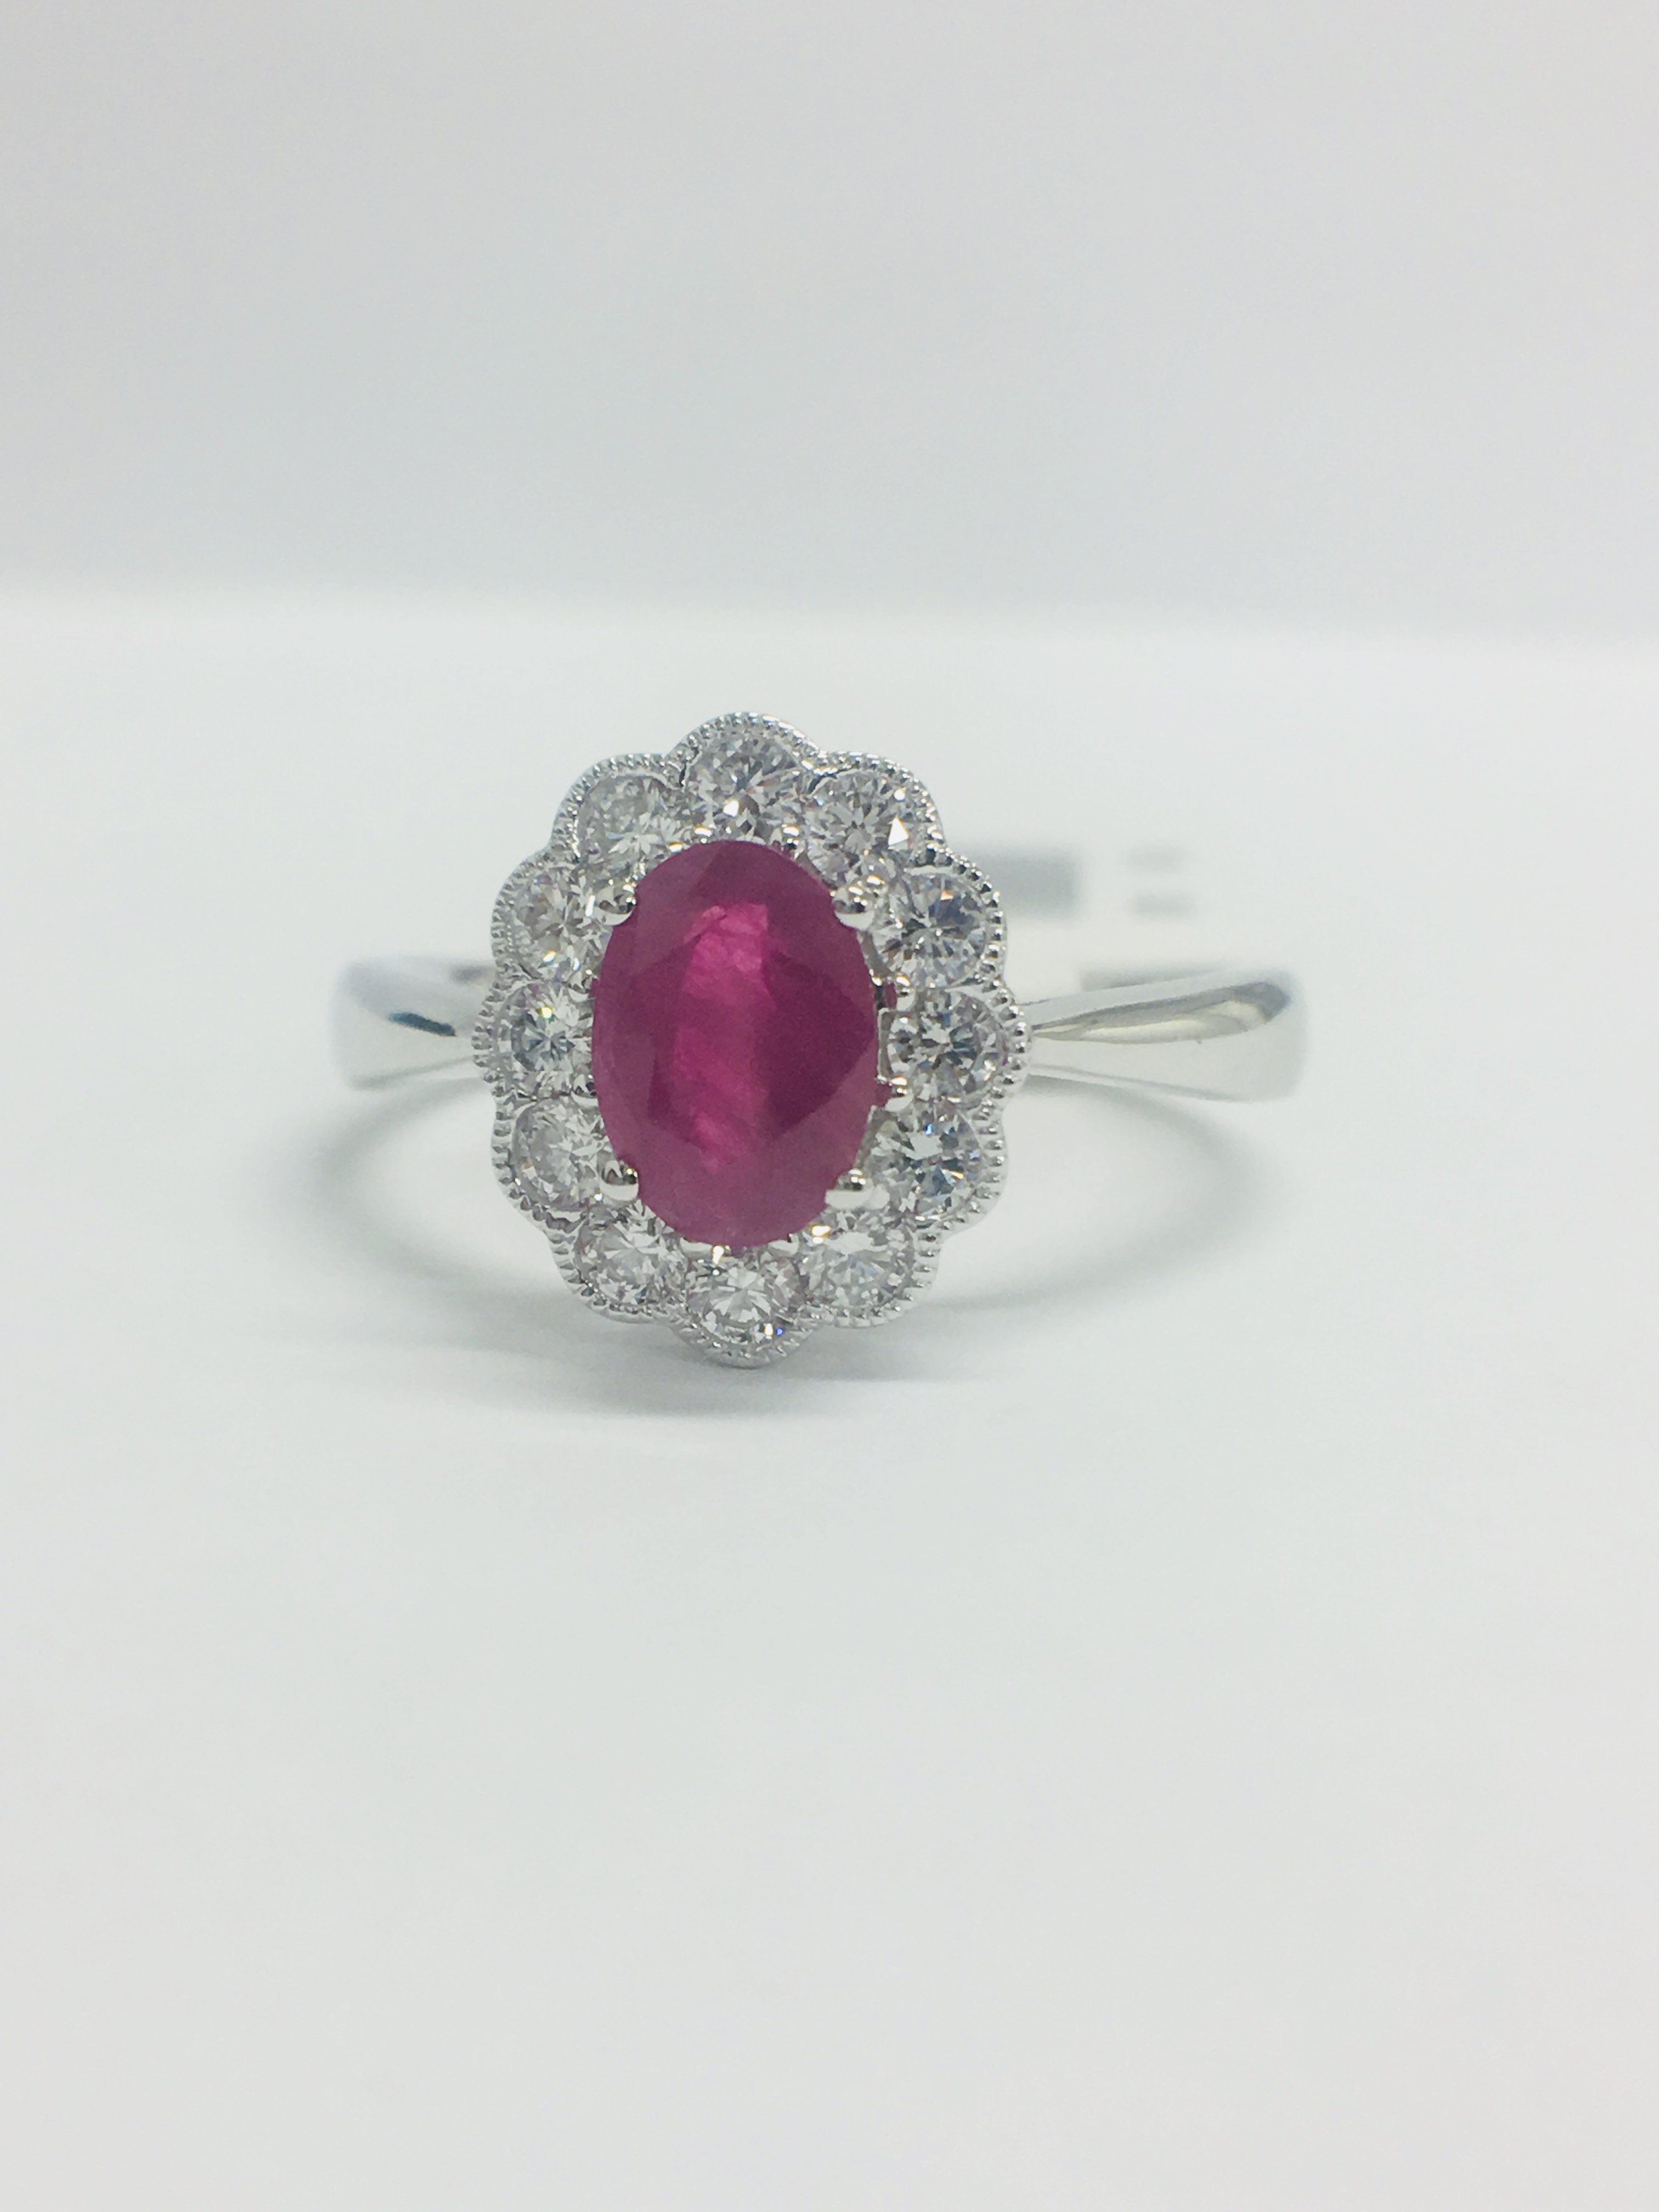 18Ct White Gold Ruby Diamond Cluster Ring, - Image 9 of 10